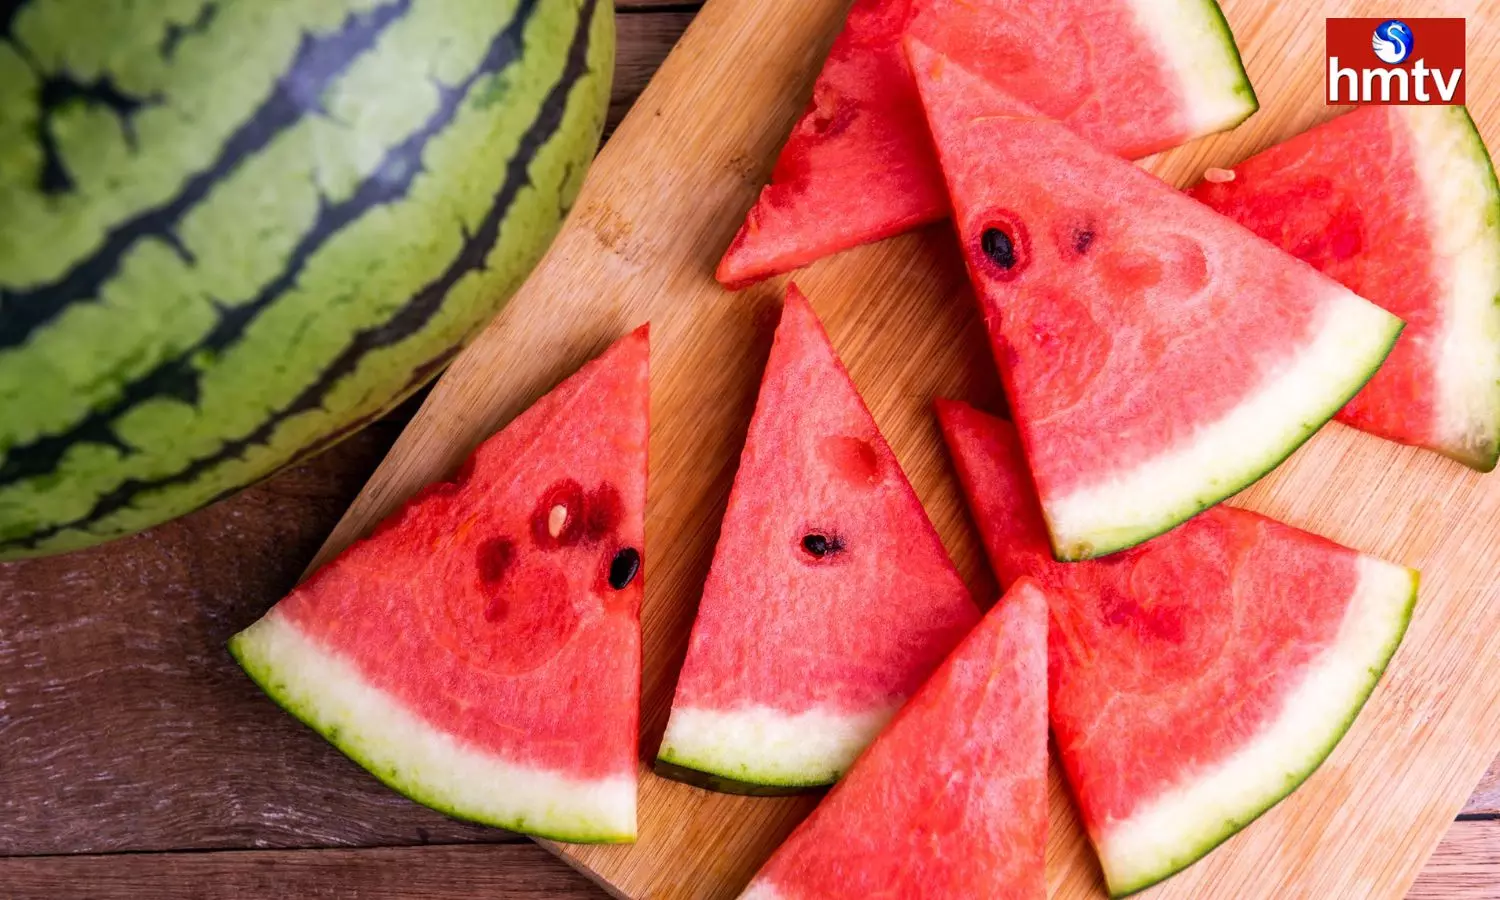 Are you eating watermelon during summer know about its benefits